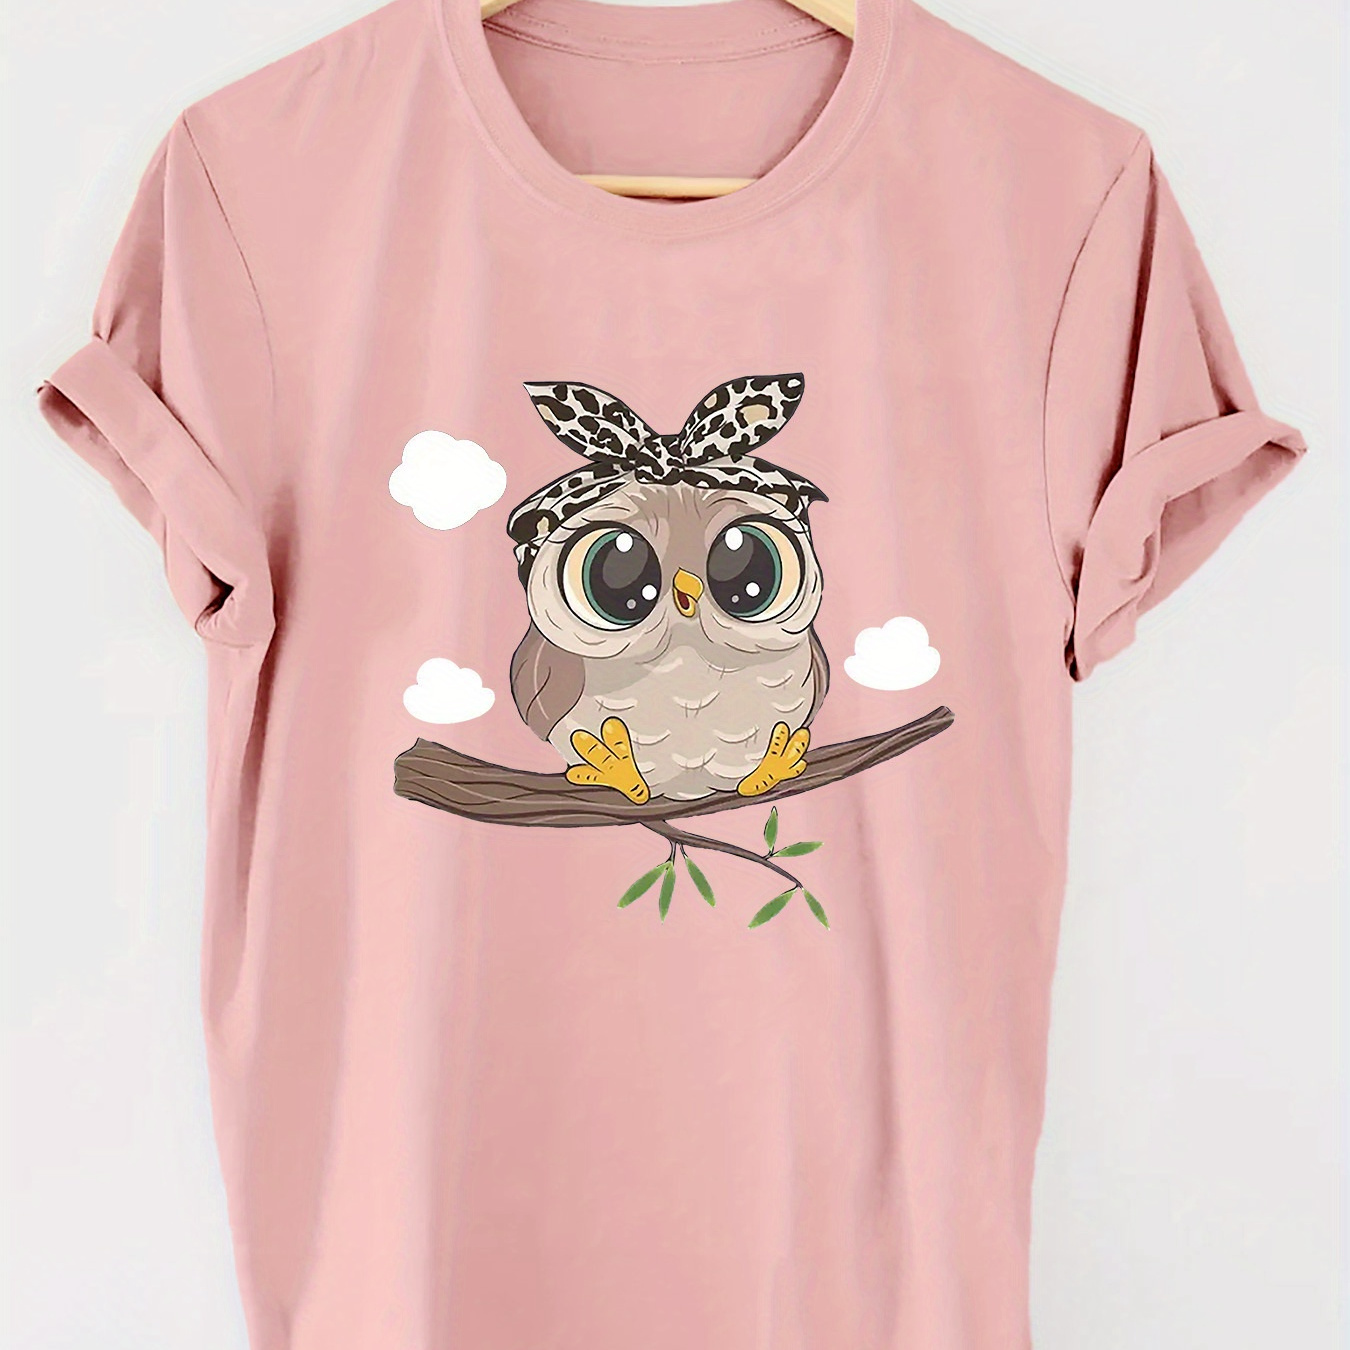 

Owl Print Crew Neck T-shirt, Short Sleeve Casual Top For Summer & Spring, Women's Clothing